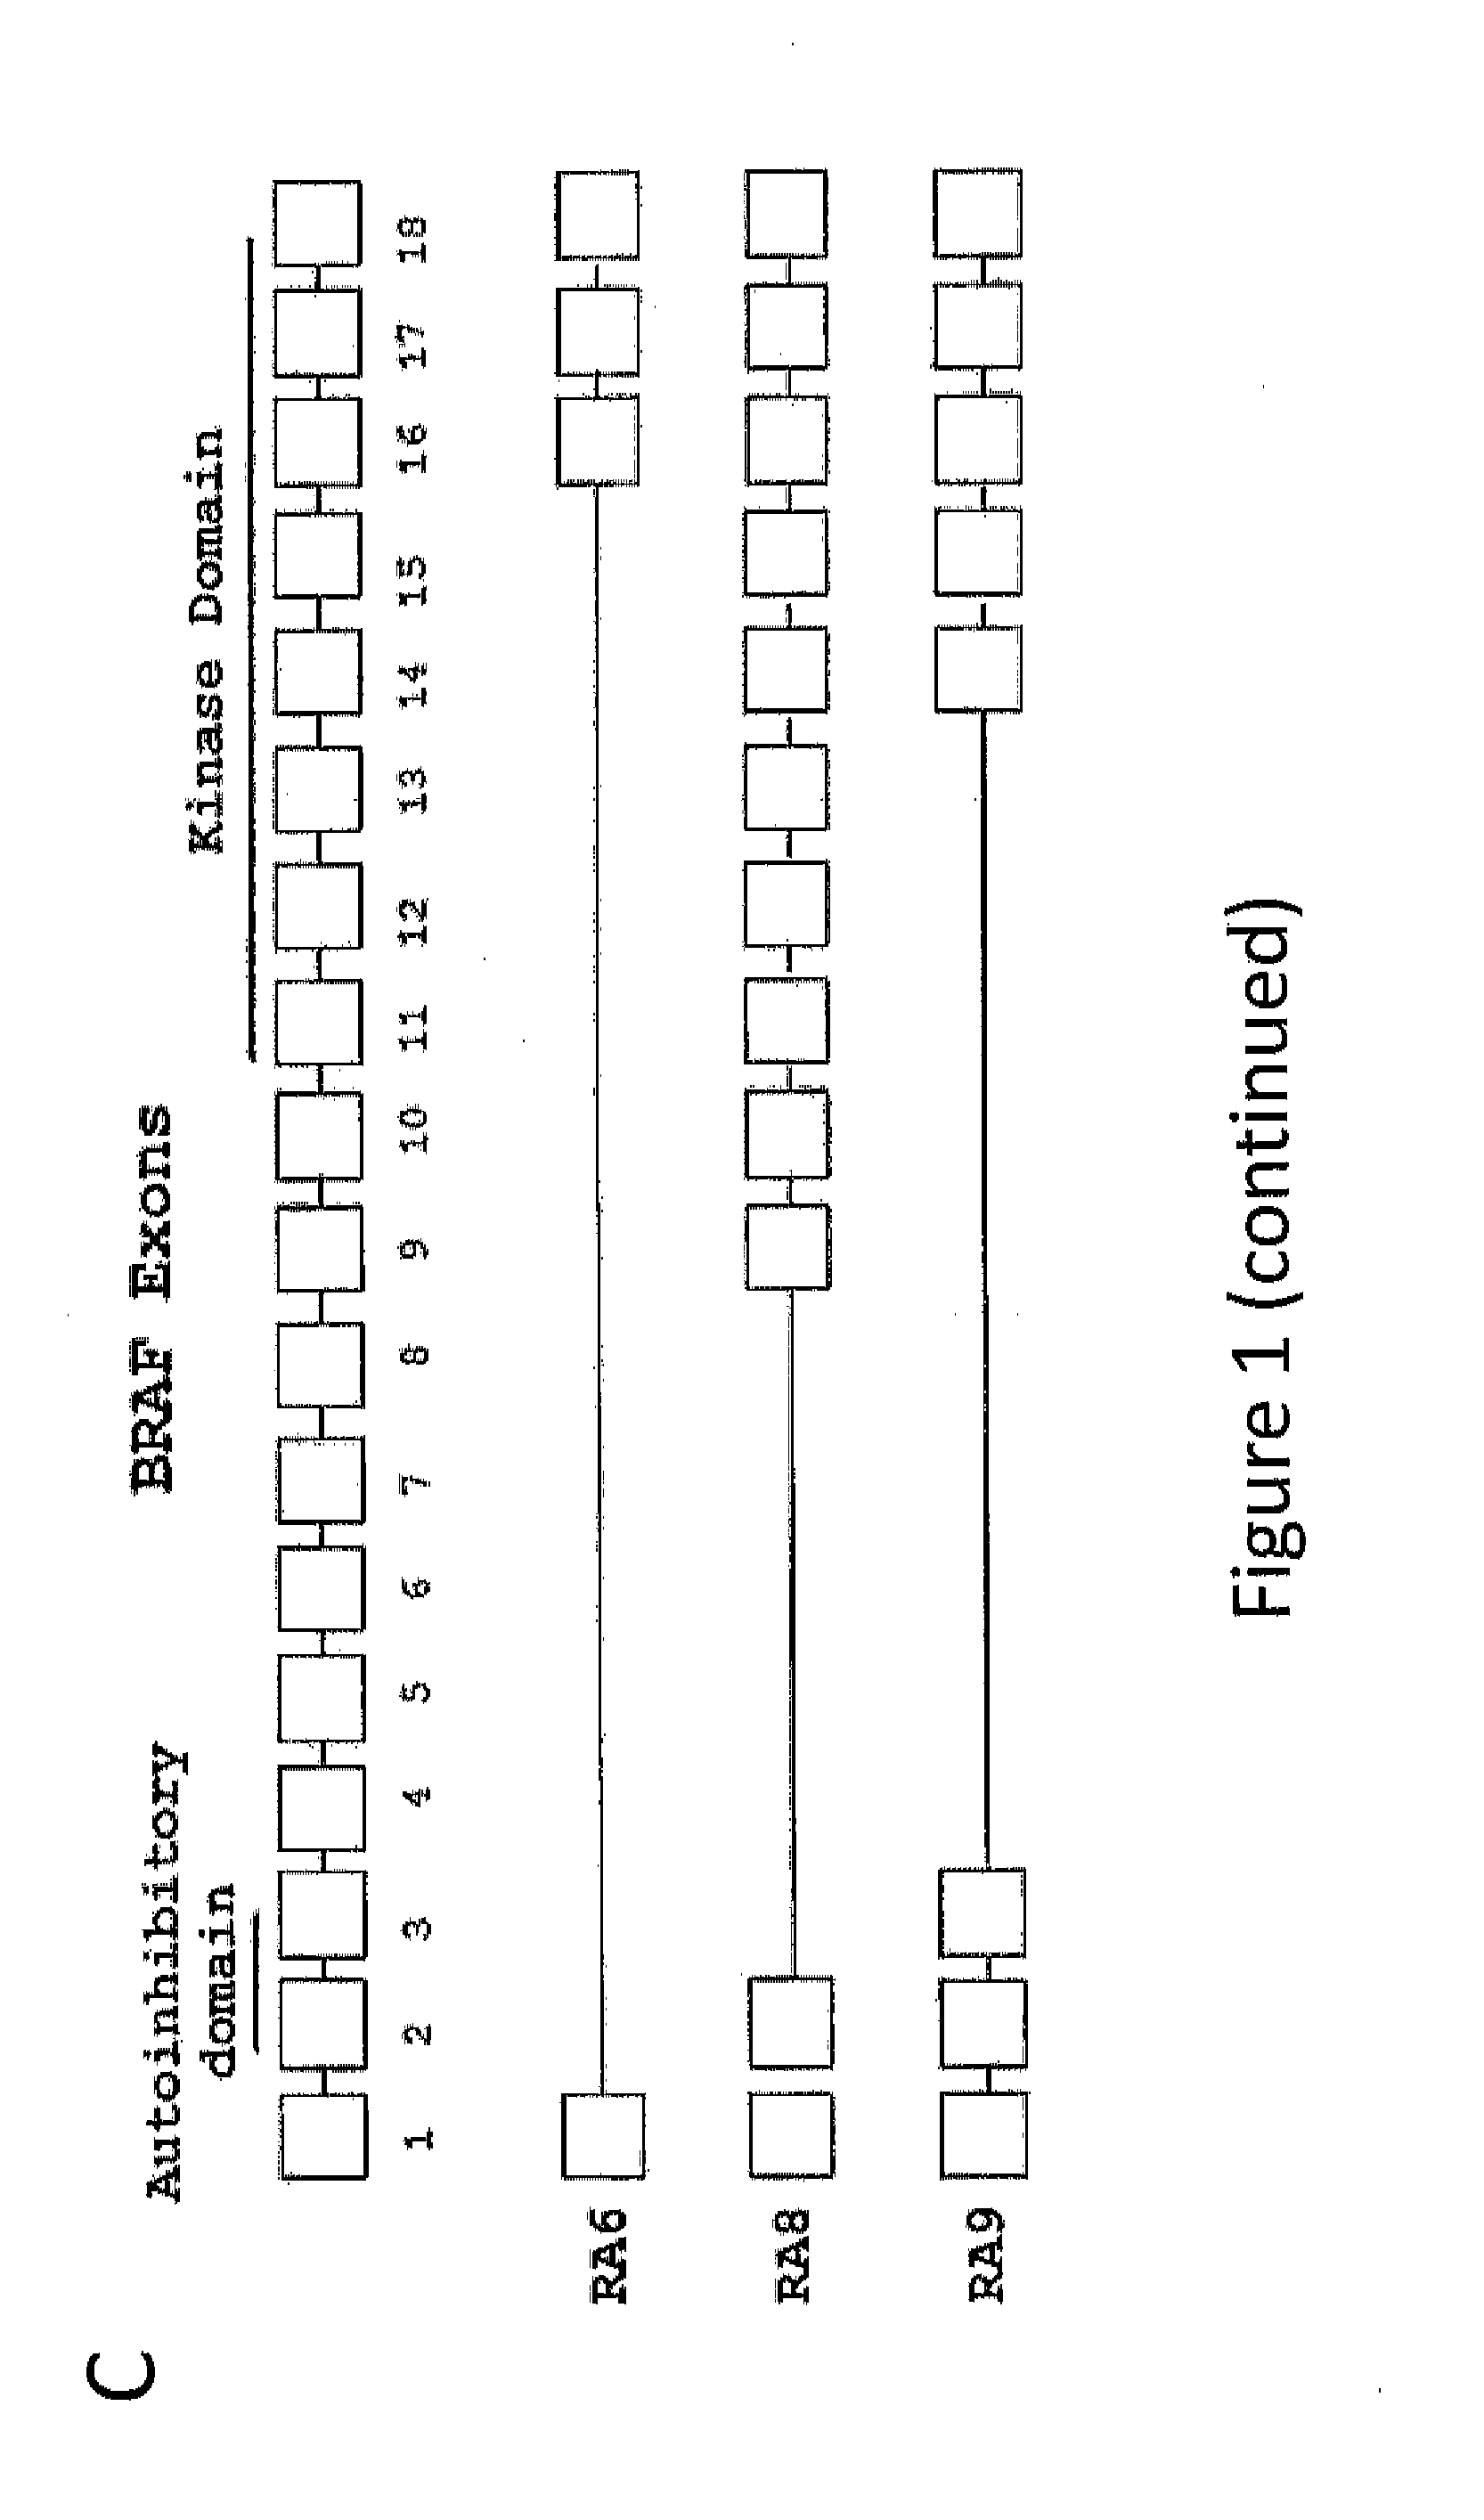 Methods for determining and inhibiting rheumatoid arthritis associated with the braf oncogene in a subject